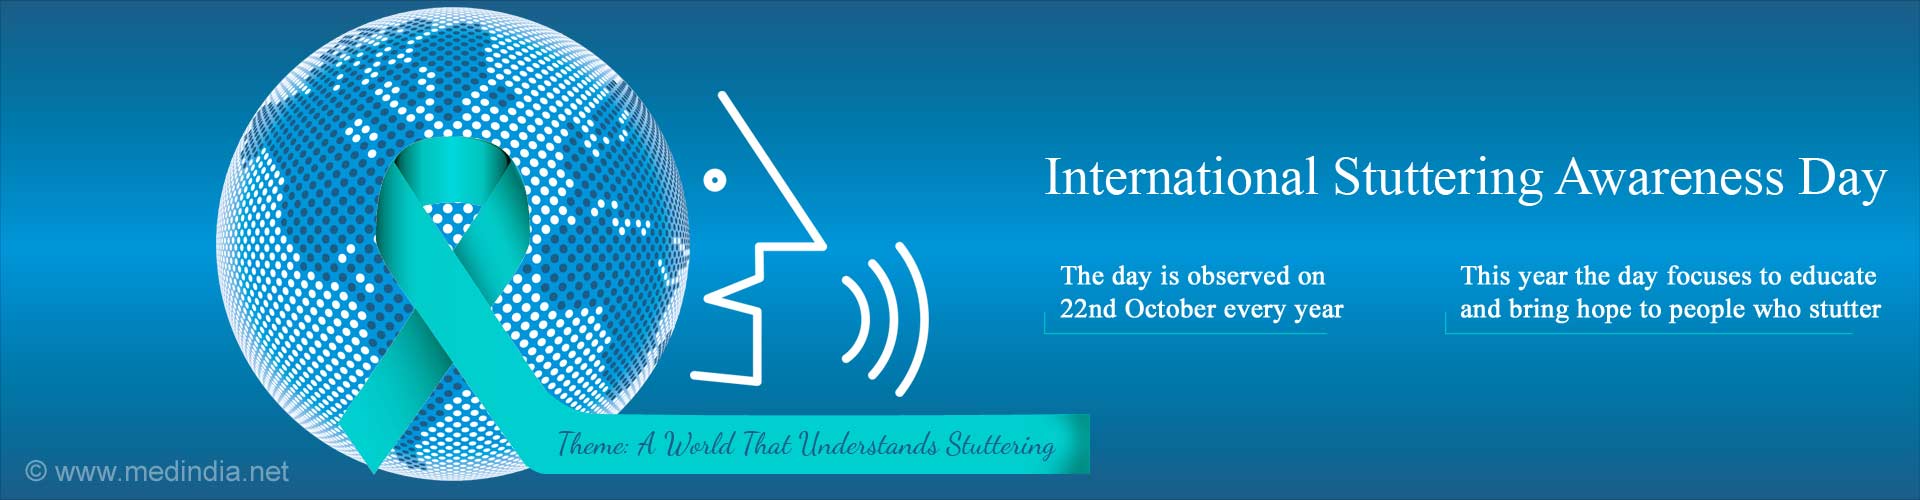 International Stuttering Awareness Day
- The day is observed on 22nd October every year
- This year the day focuses to educate and bring hope to people who stutter